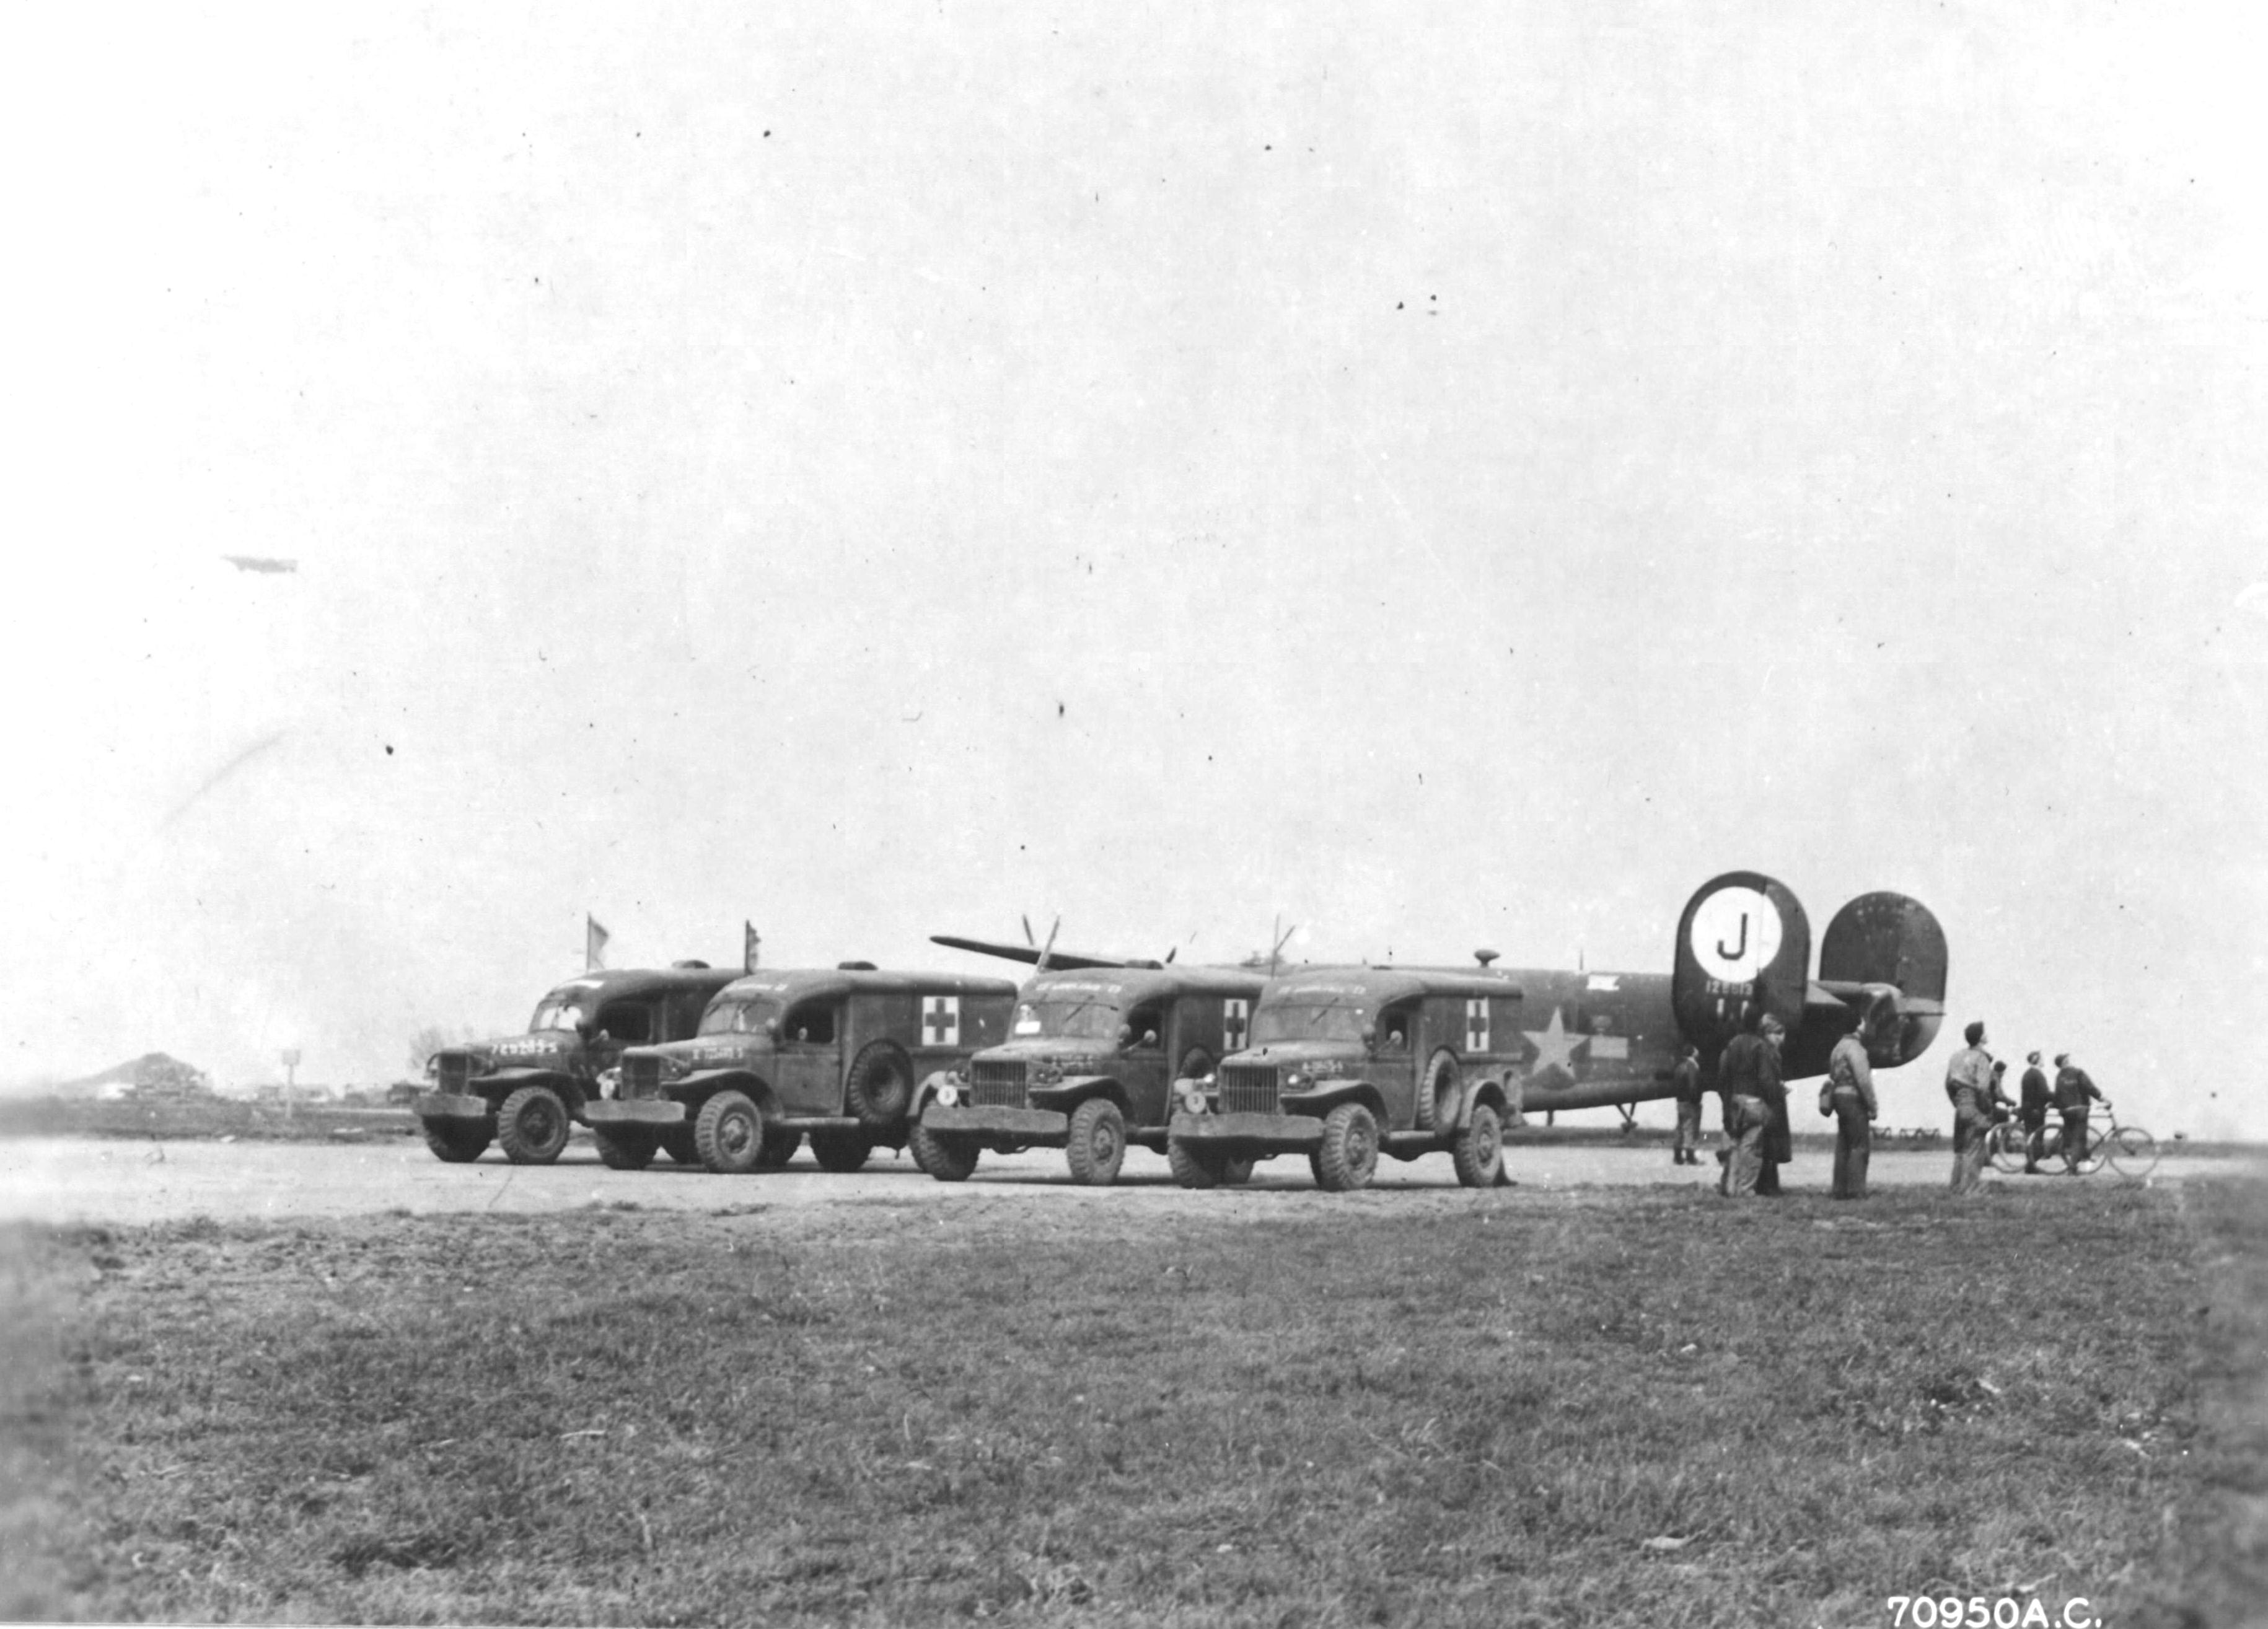 WC-54 ambulances waiting for returning B-24 Liberator bombers of the 453rd Bomb Group at Old Buckenham in England, United Kingdom, Mar 16, 1944